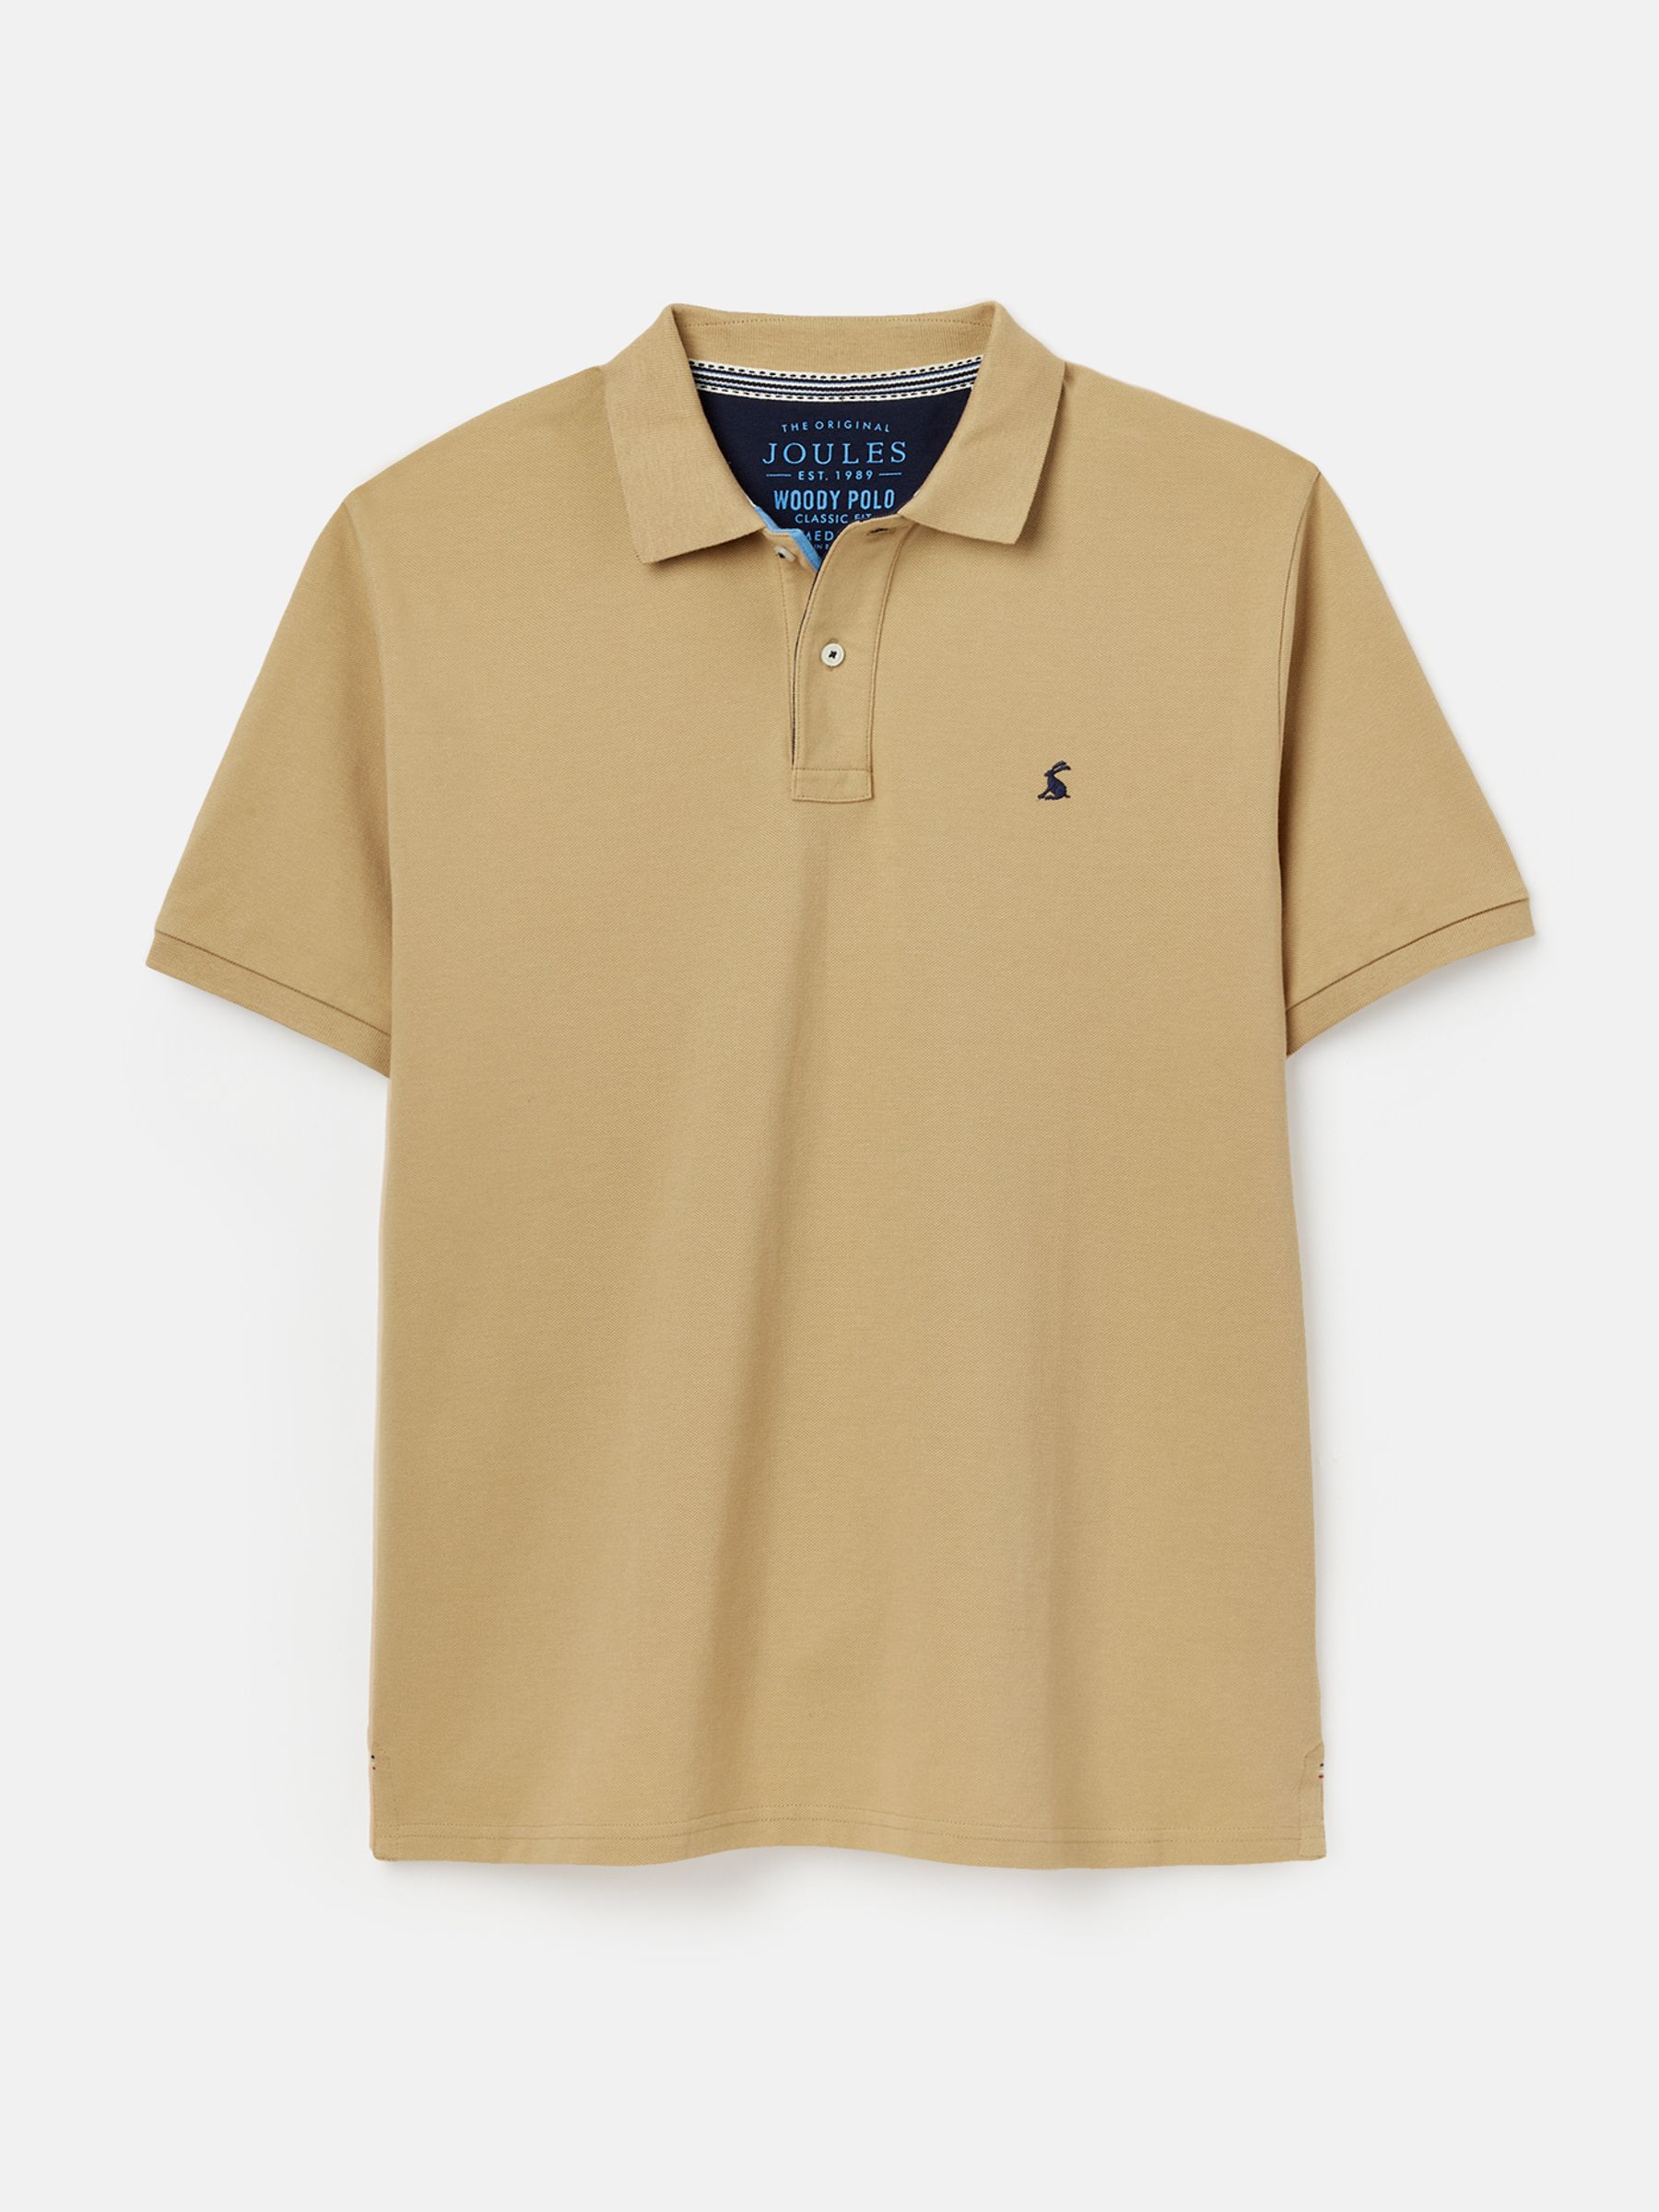 Buy Joules Woody Polo Shirt from the Joules online shop